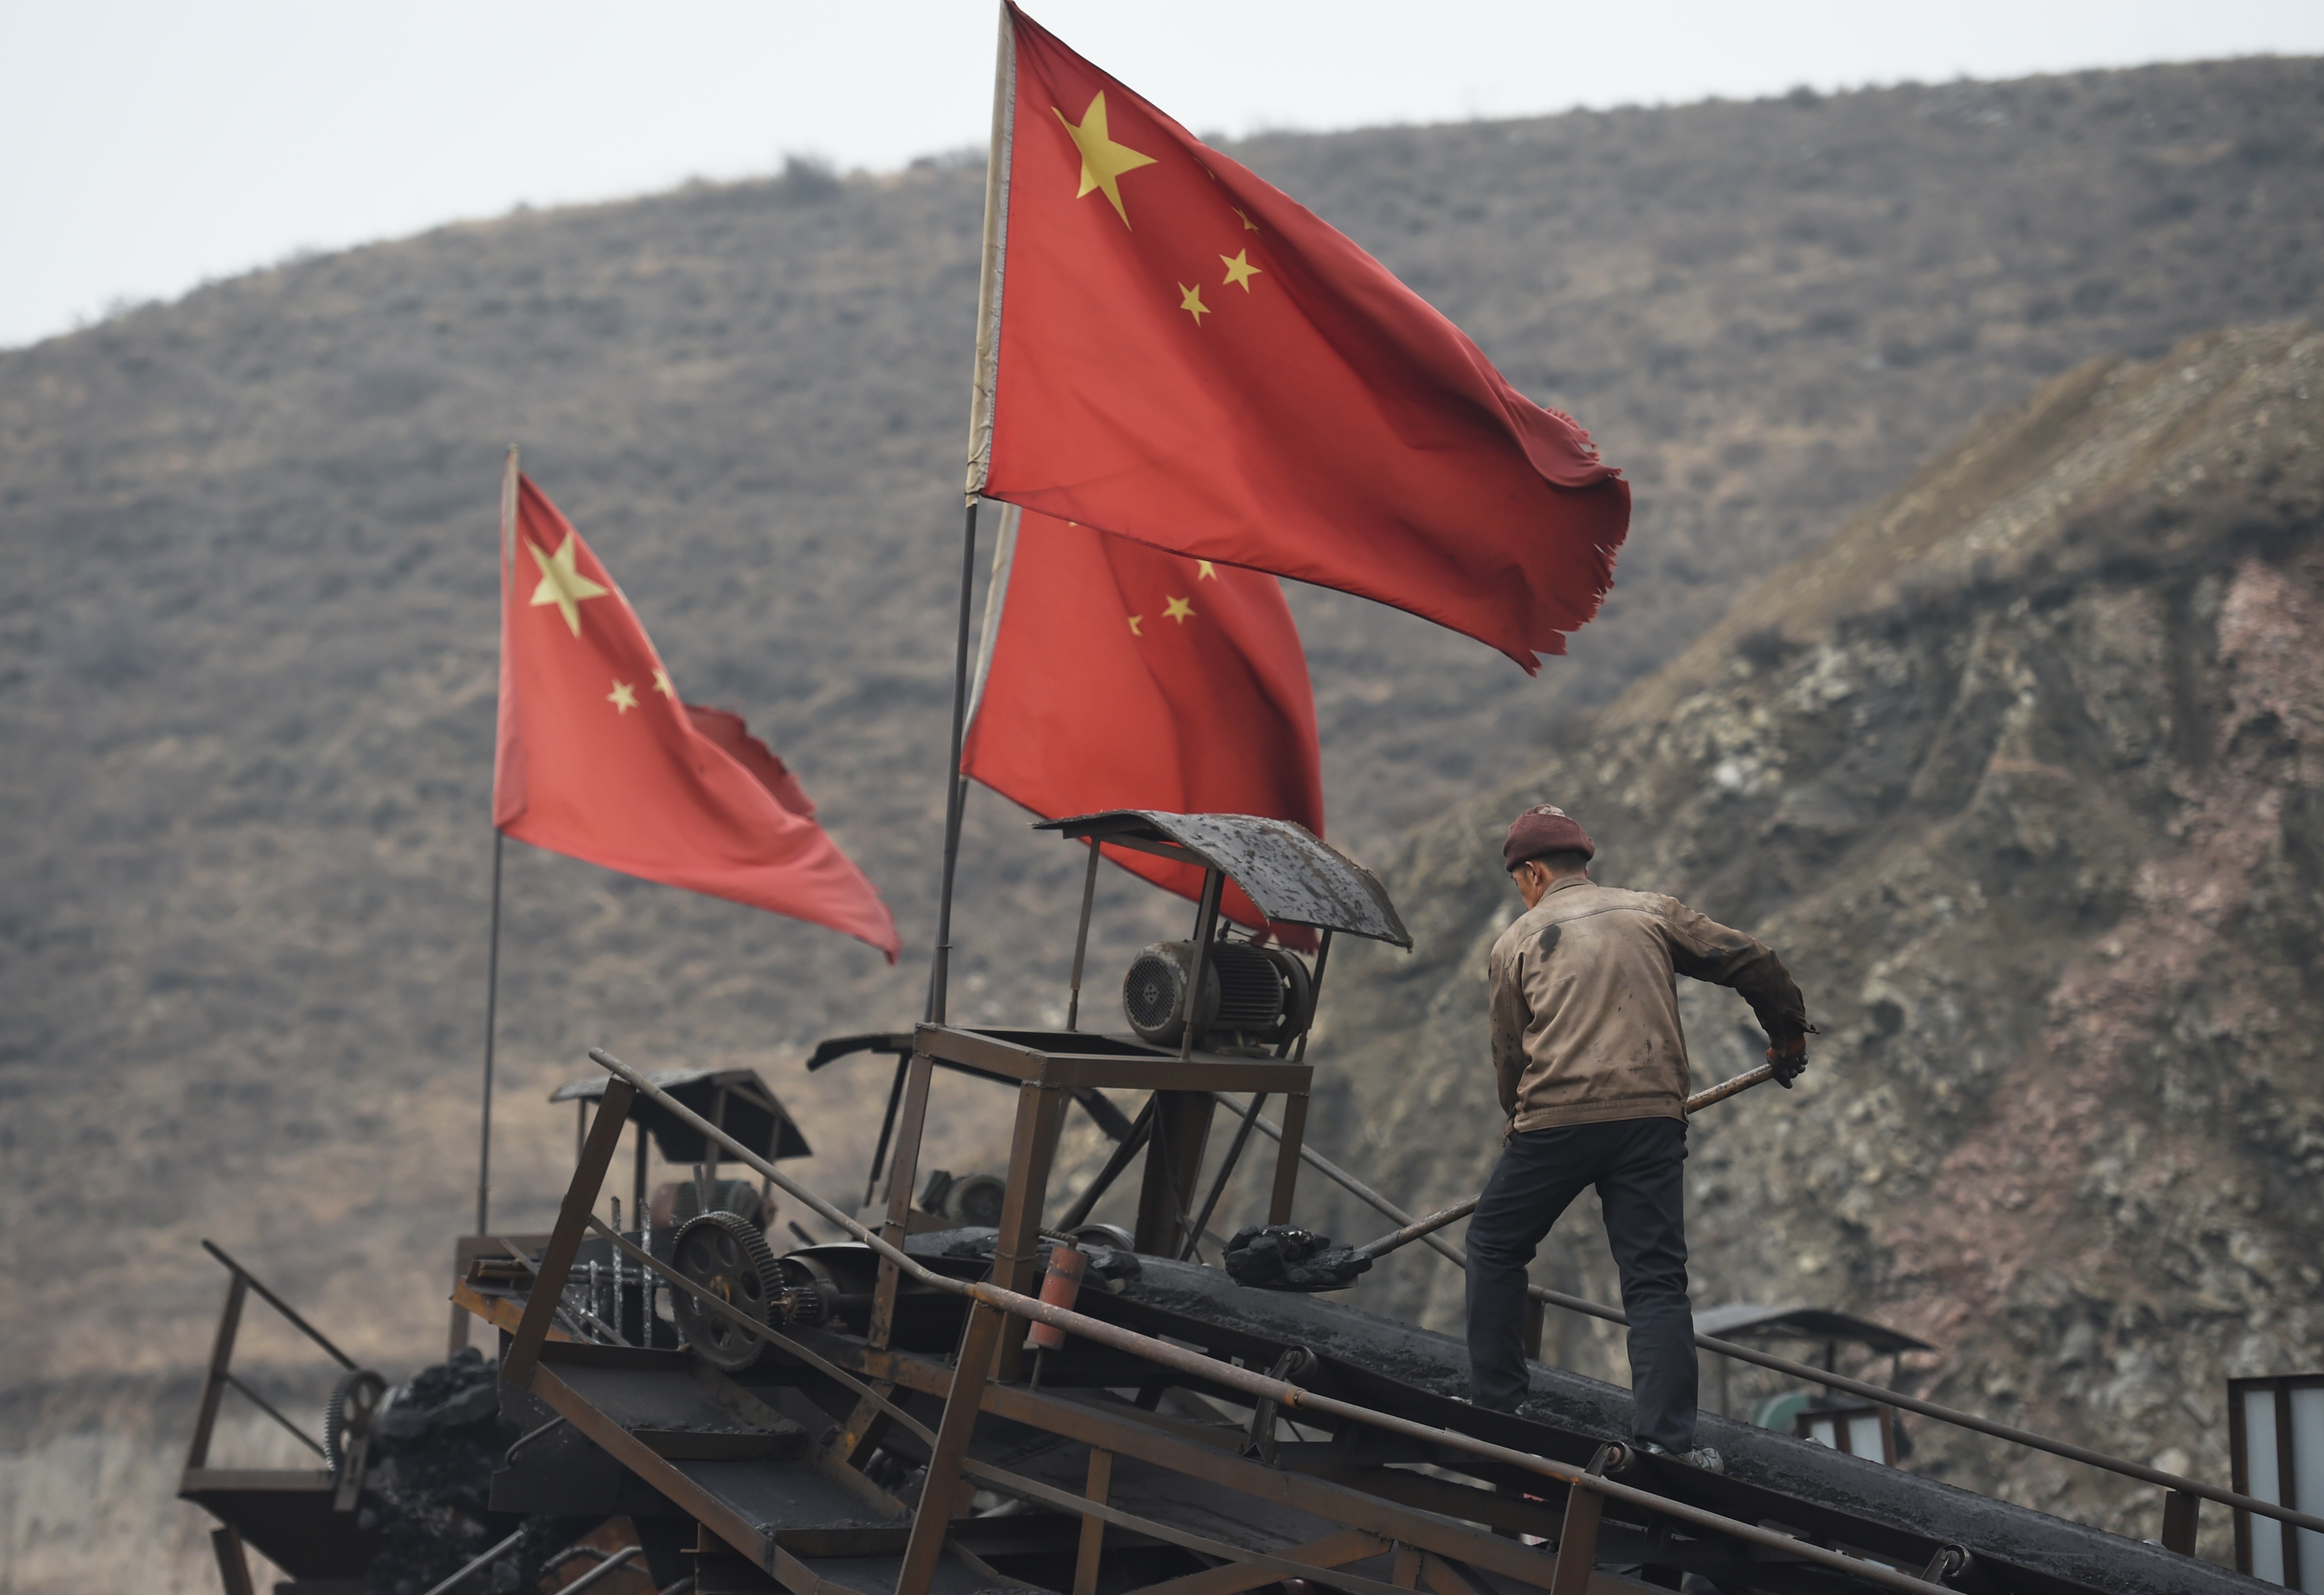 Chinese coal consumption rose for the second consecutive year in 2018, reversing a three-year fall from 2014 to 2016, fanning fears among climate scientists that the world’s largest emitter of greenhouse gases are not serious about cutting emissions. Photo: AFP